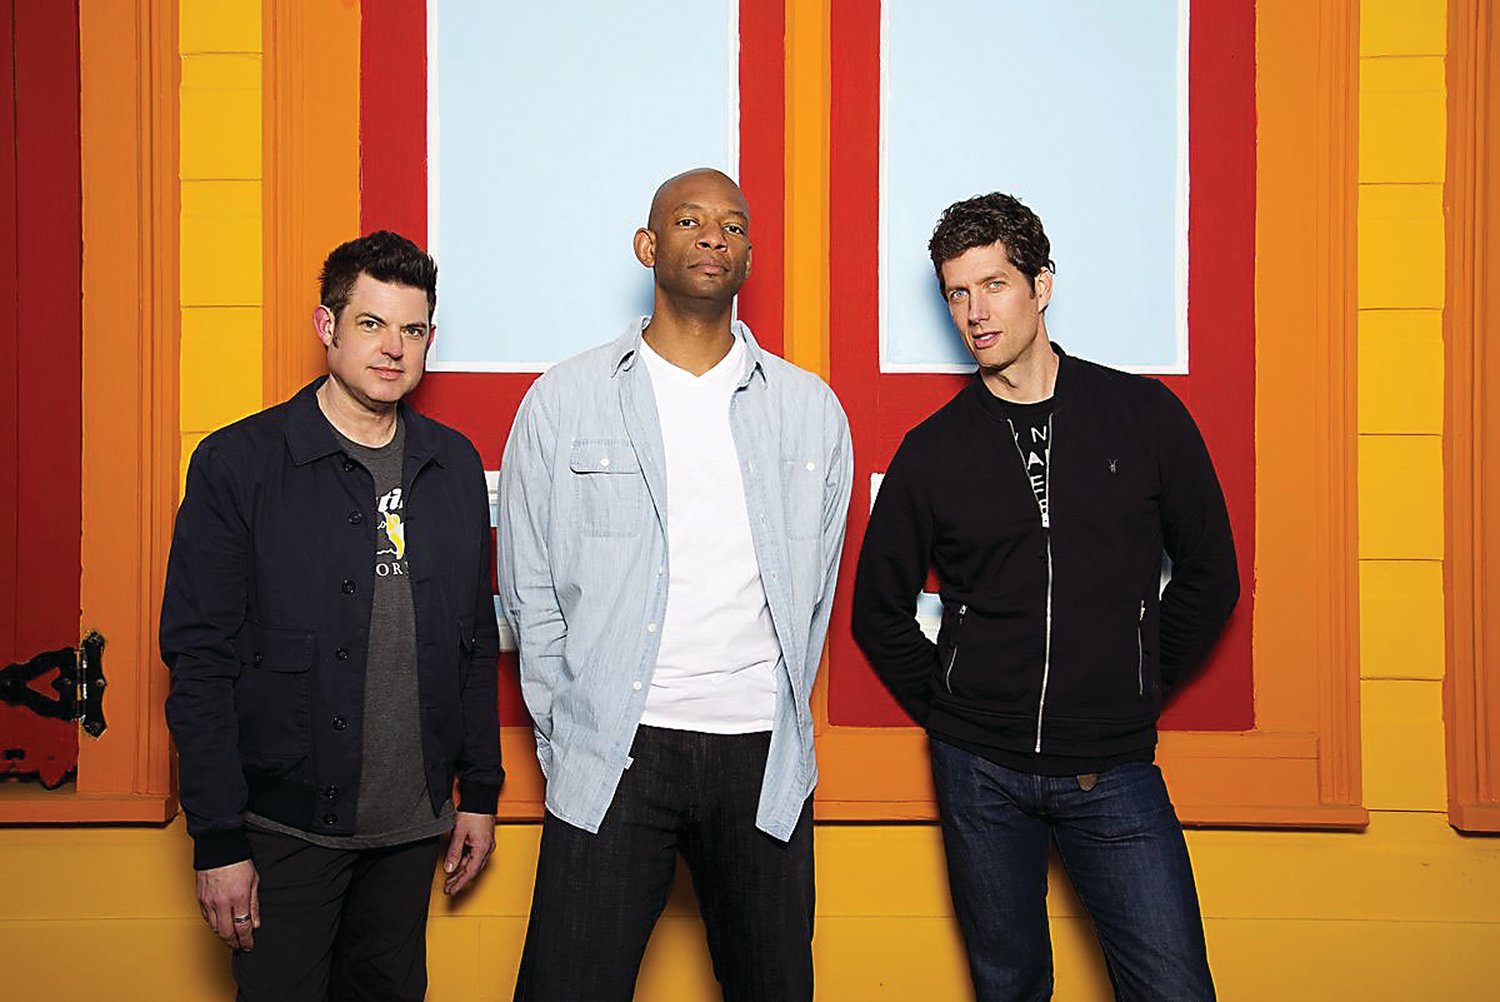 Better Than Ezra comes to Bethlehem this summer.